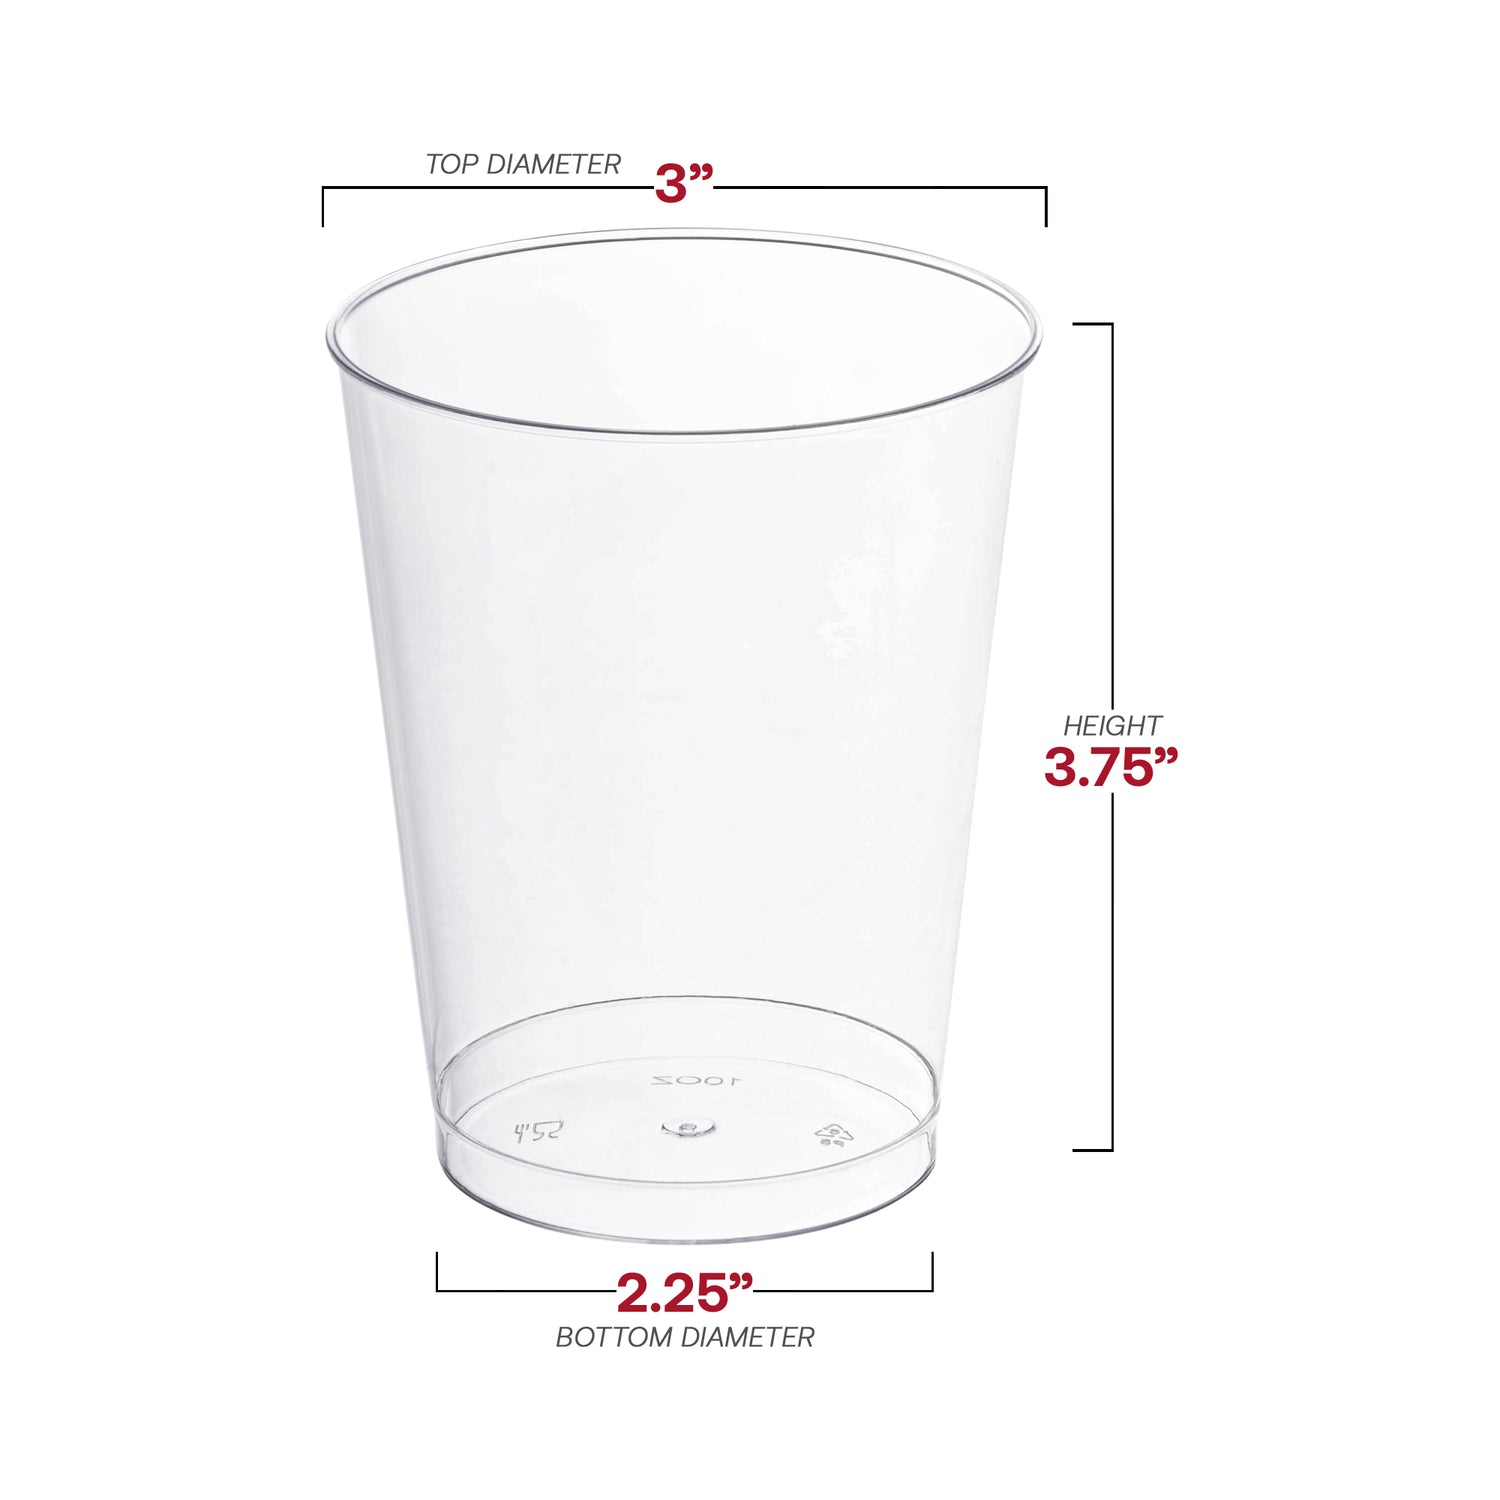 10 oz. Clear Round Plastic Cups Dimension | The Kaya Collection